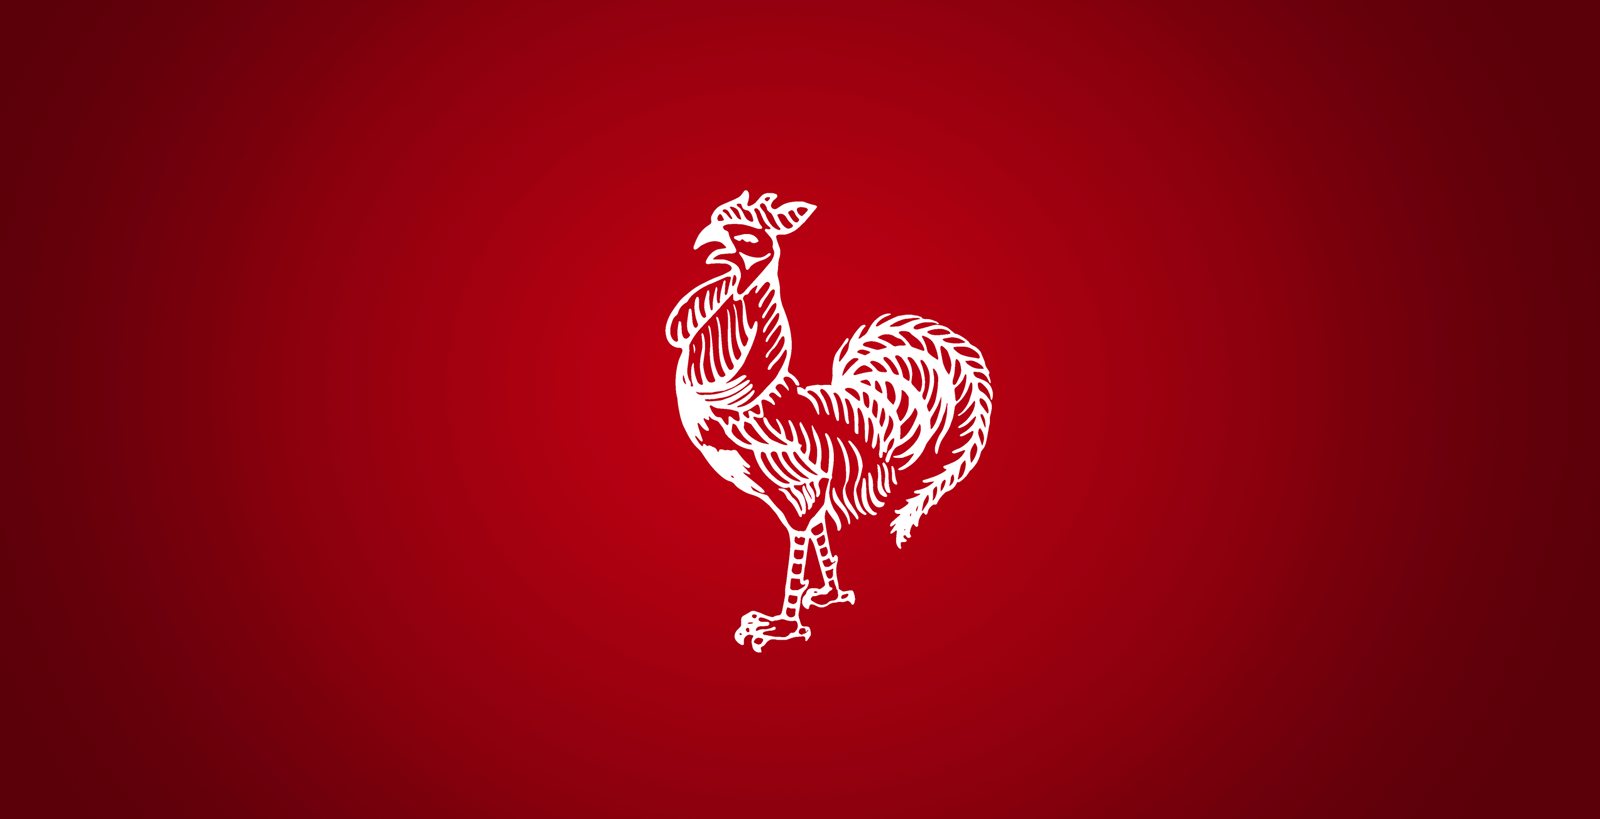 Most Famous Rooster Logo - Huy Fong Foods, Inc. – Known Worldwide for Our HOT Chili Sauces